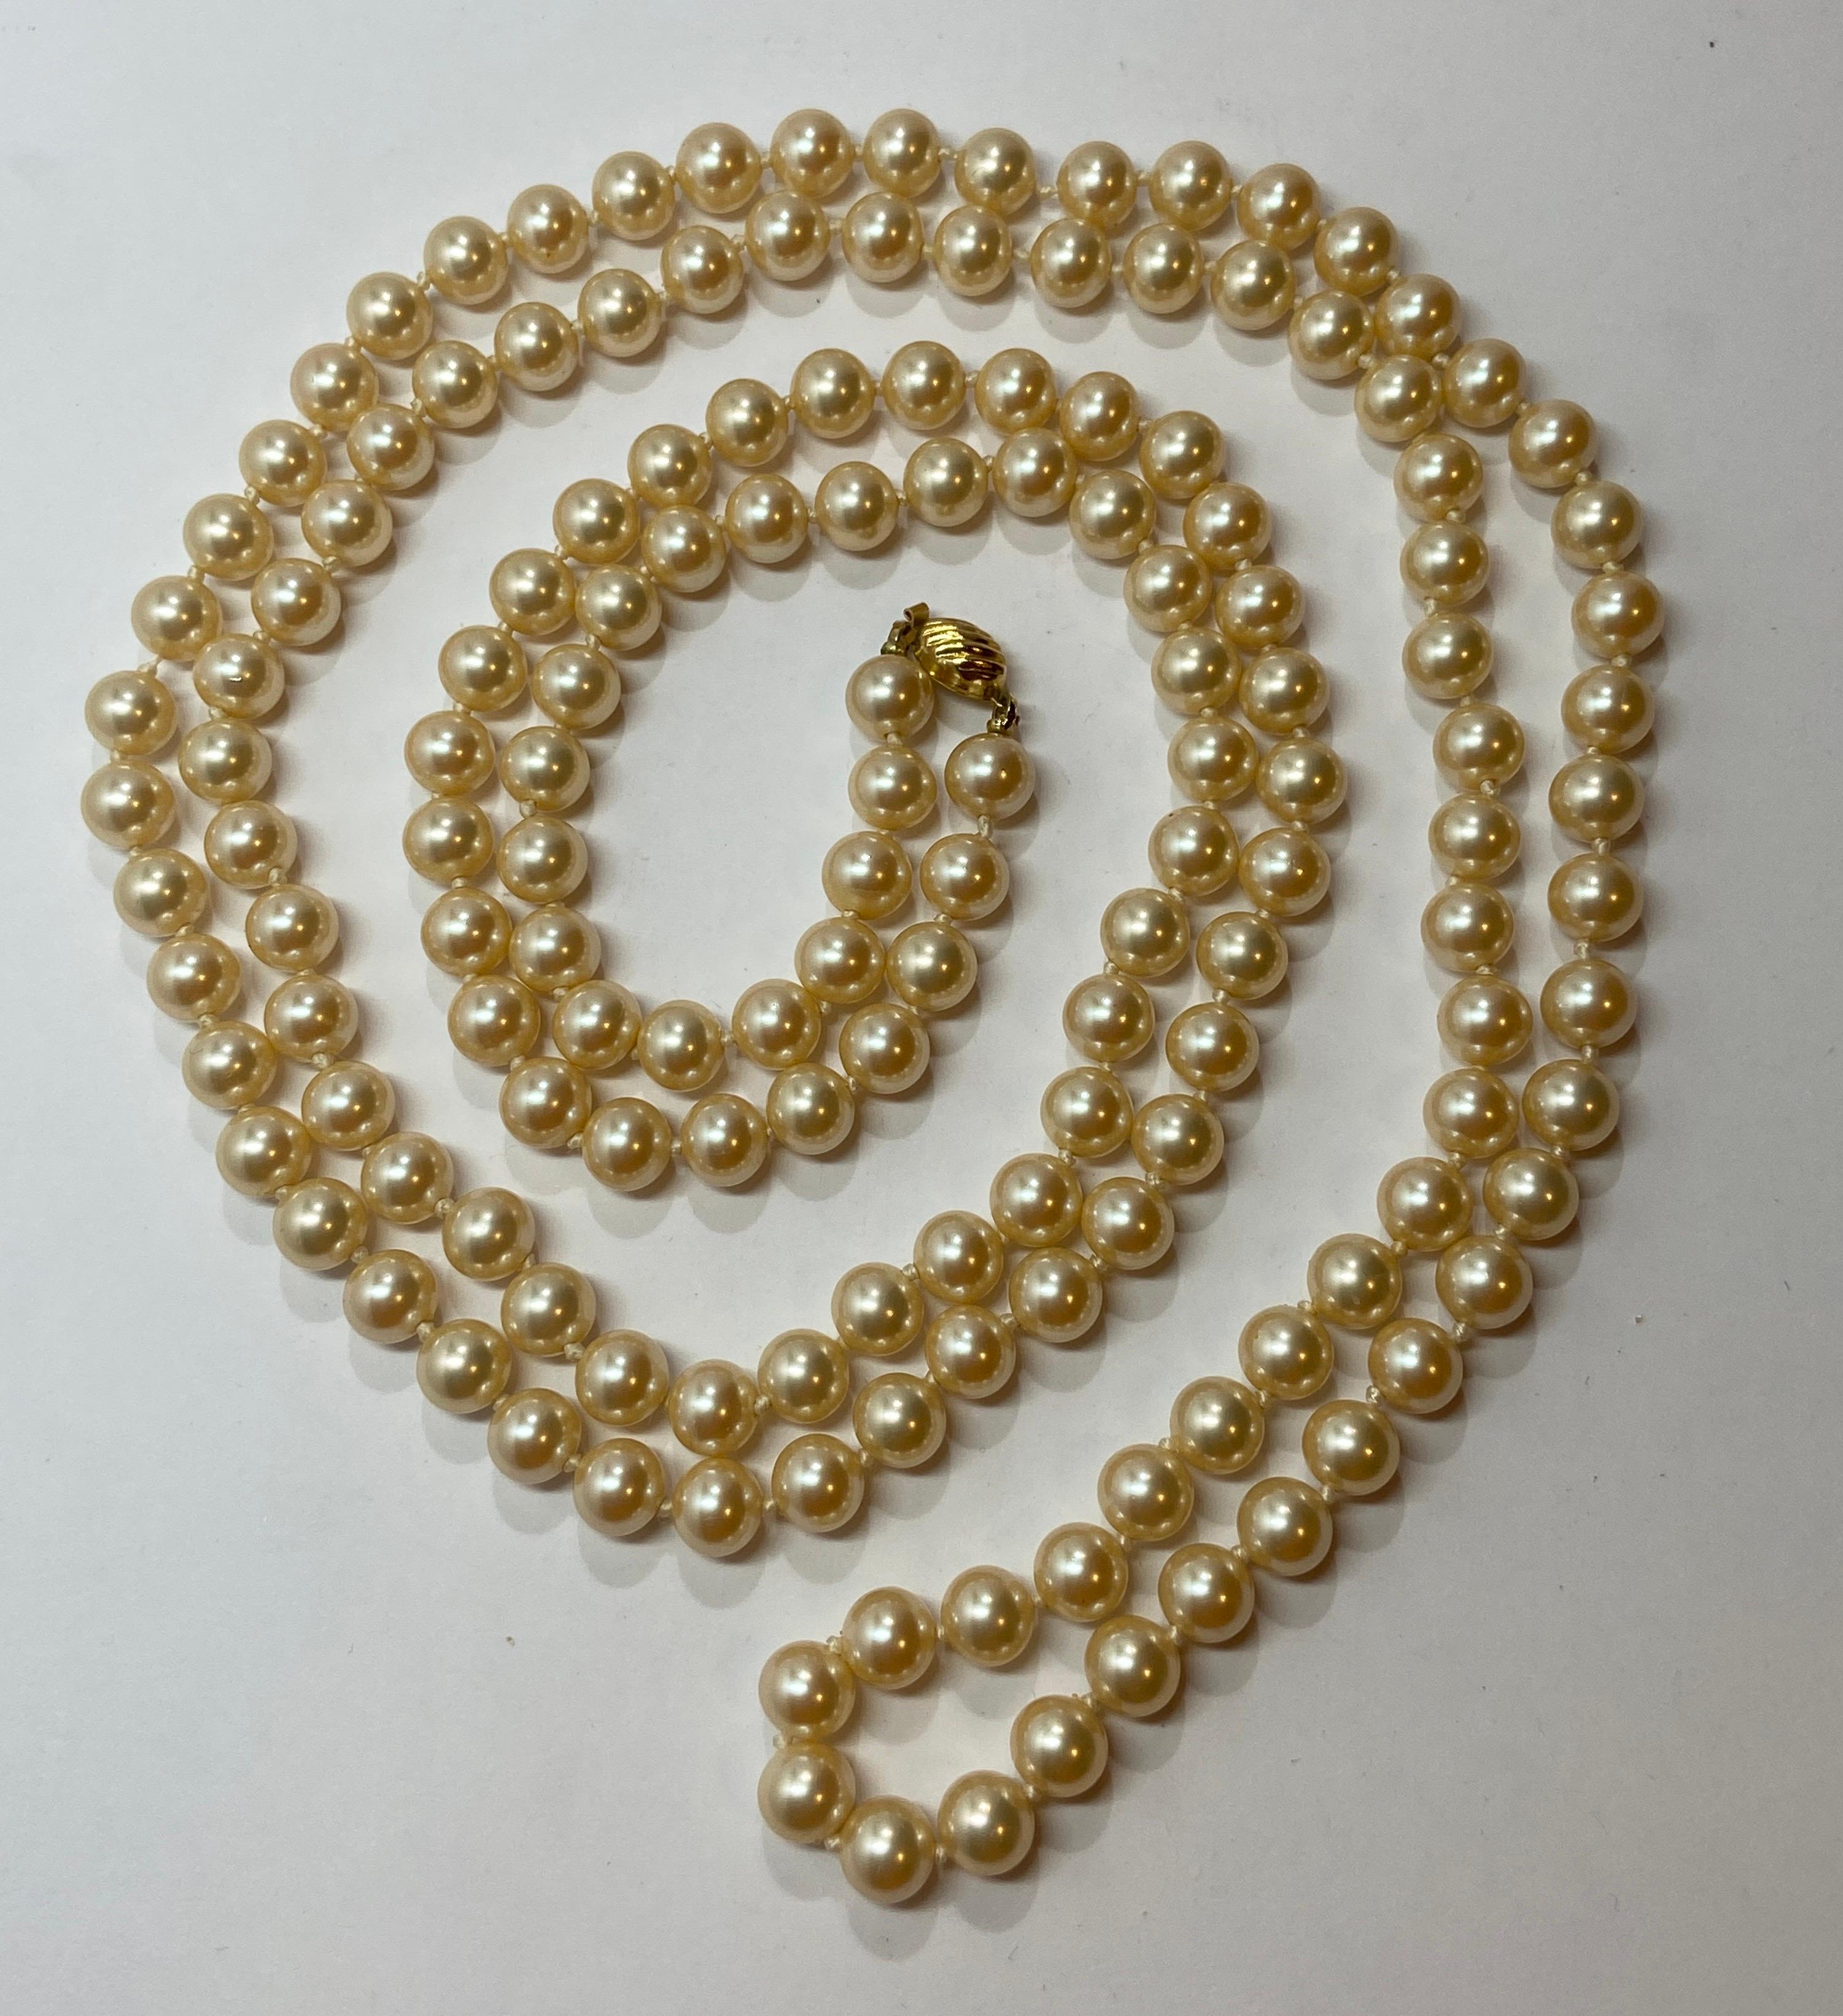 Vintage Chanel Dramatic Faux Pearl Necklace, ca. 1989 - Gem